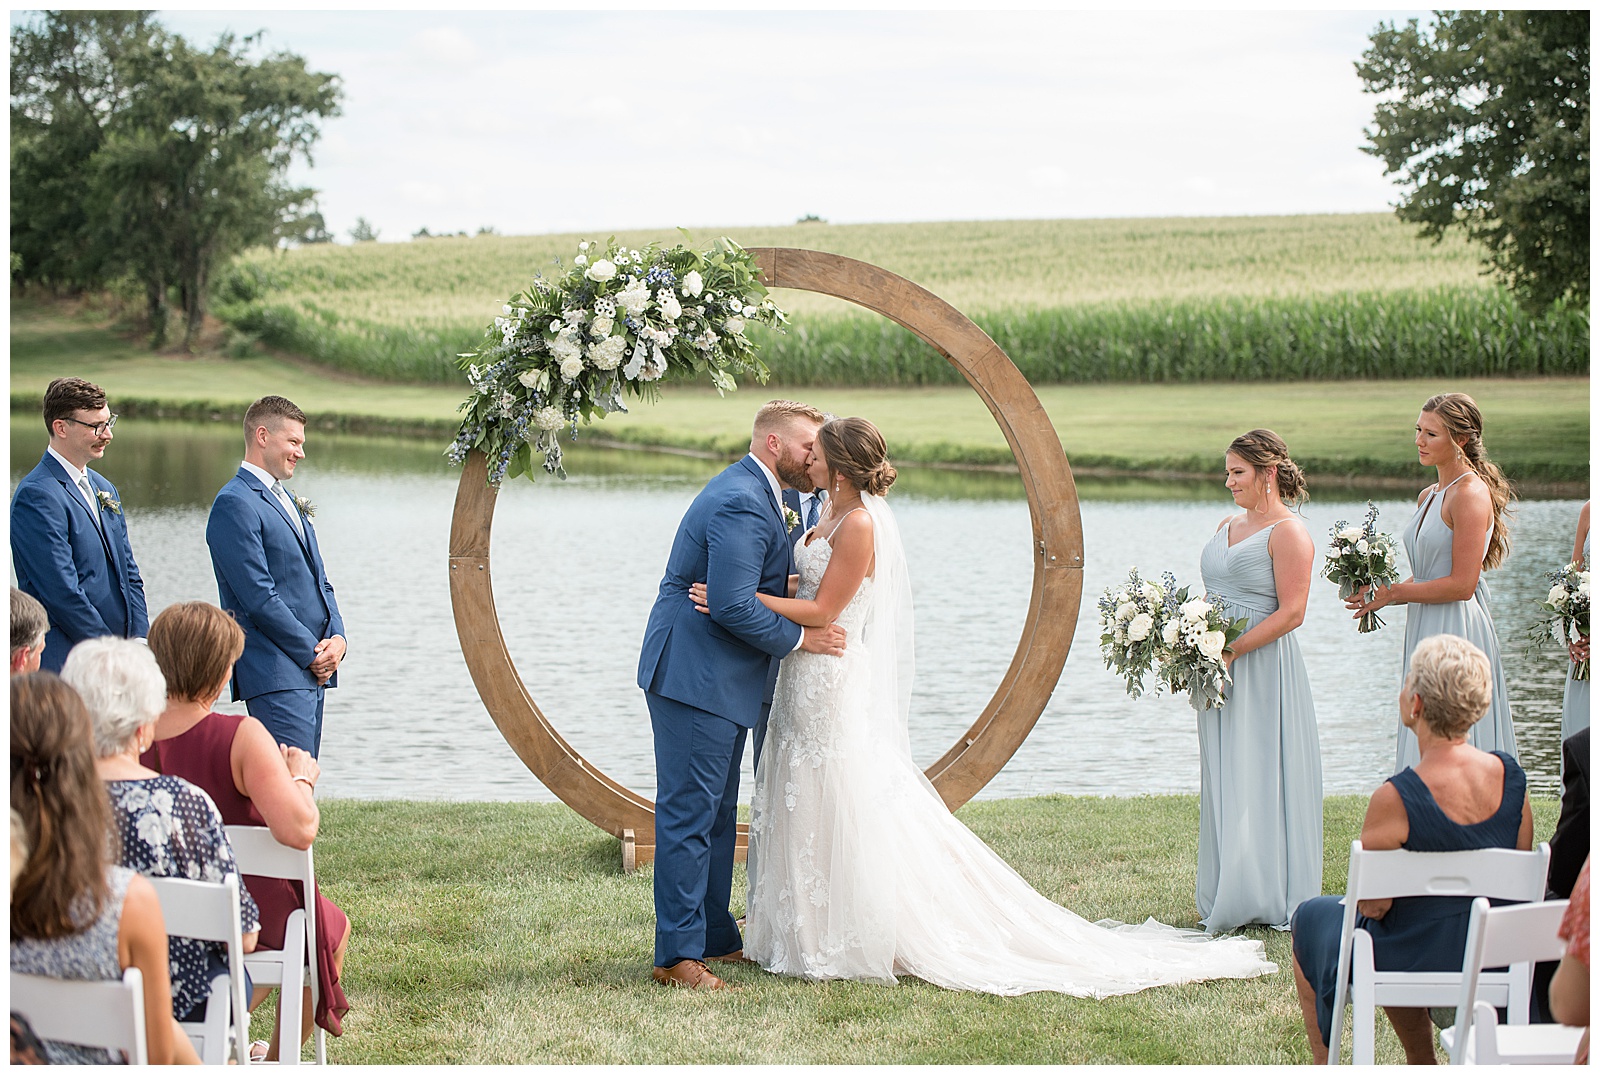 bride and groom kissing during outdoor wedding ceremony by circular wooden and floral display by pond at lakefield weddings